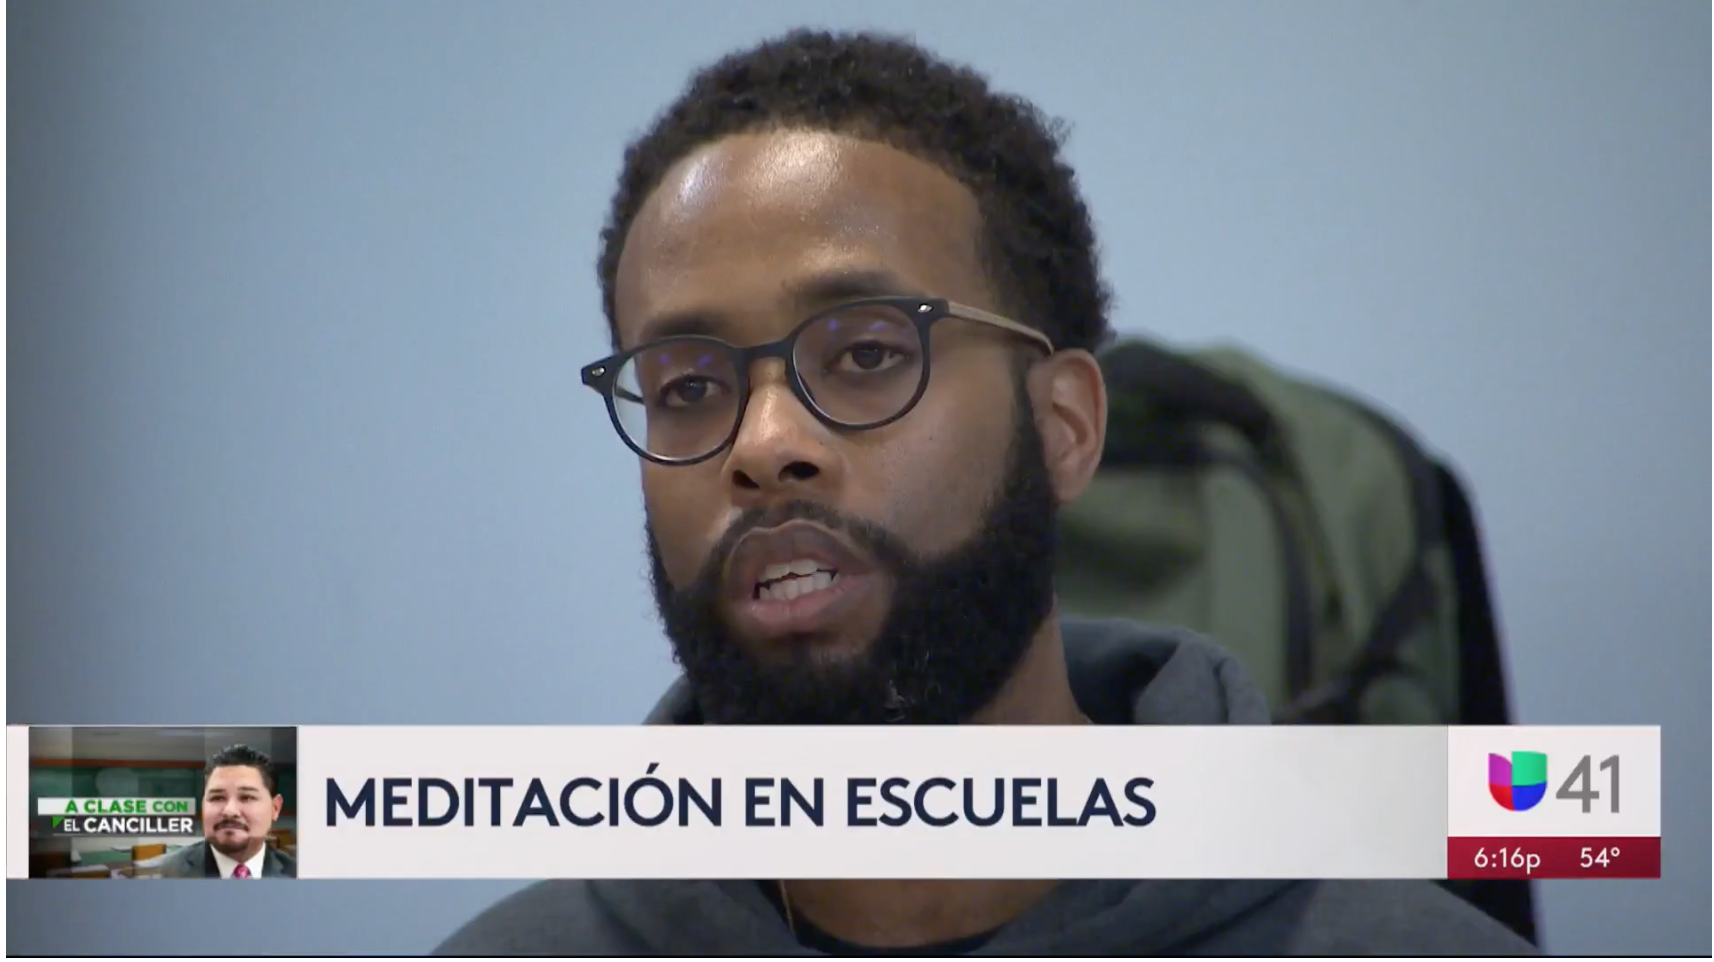 Univision: Meditation in New York schools as a method to combat bullying and contribute to concentration